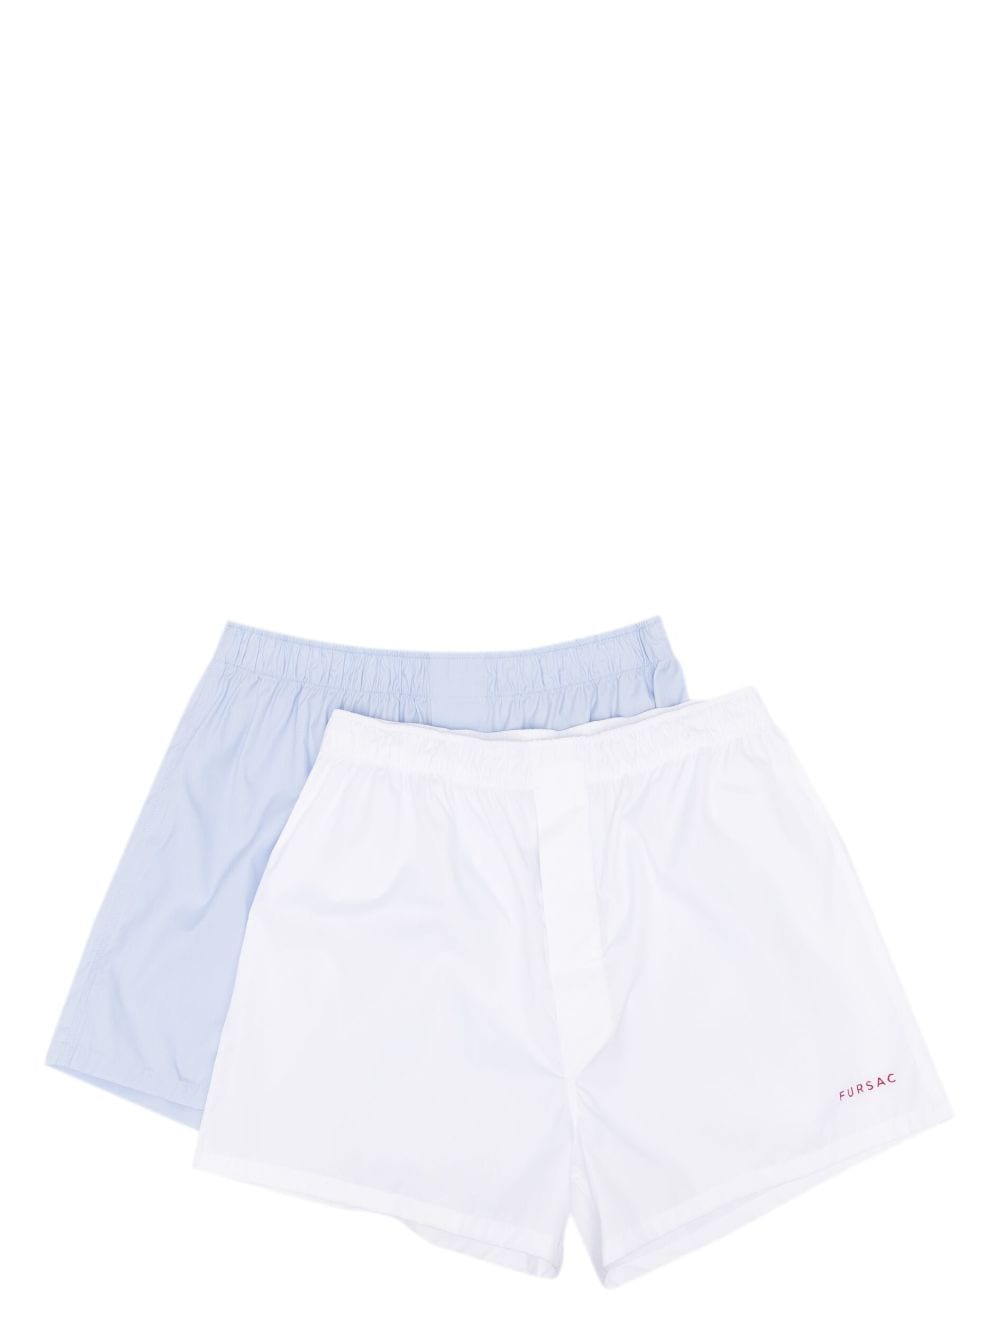 FURSAC logo-embroidered cotton boxers (pack of two) - Blue von FURSAC